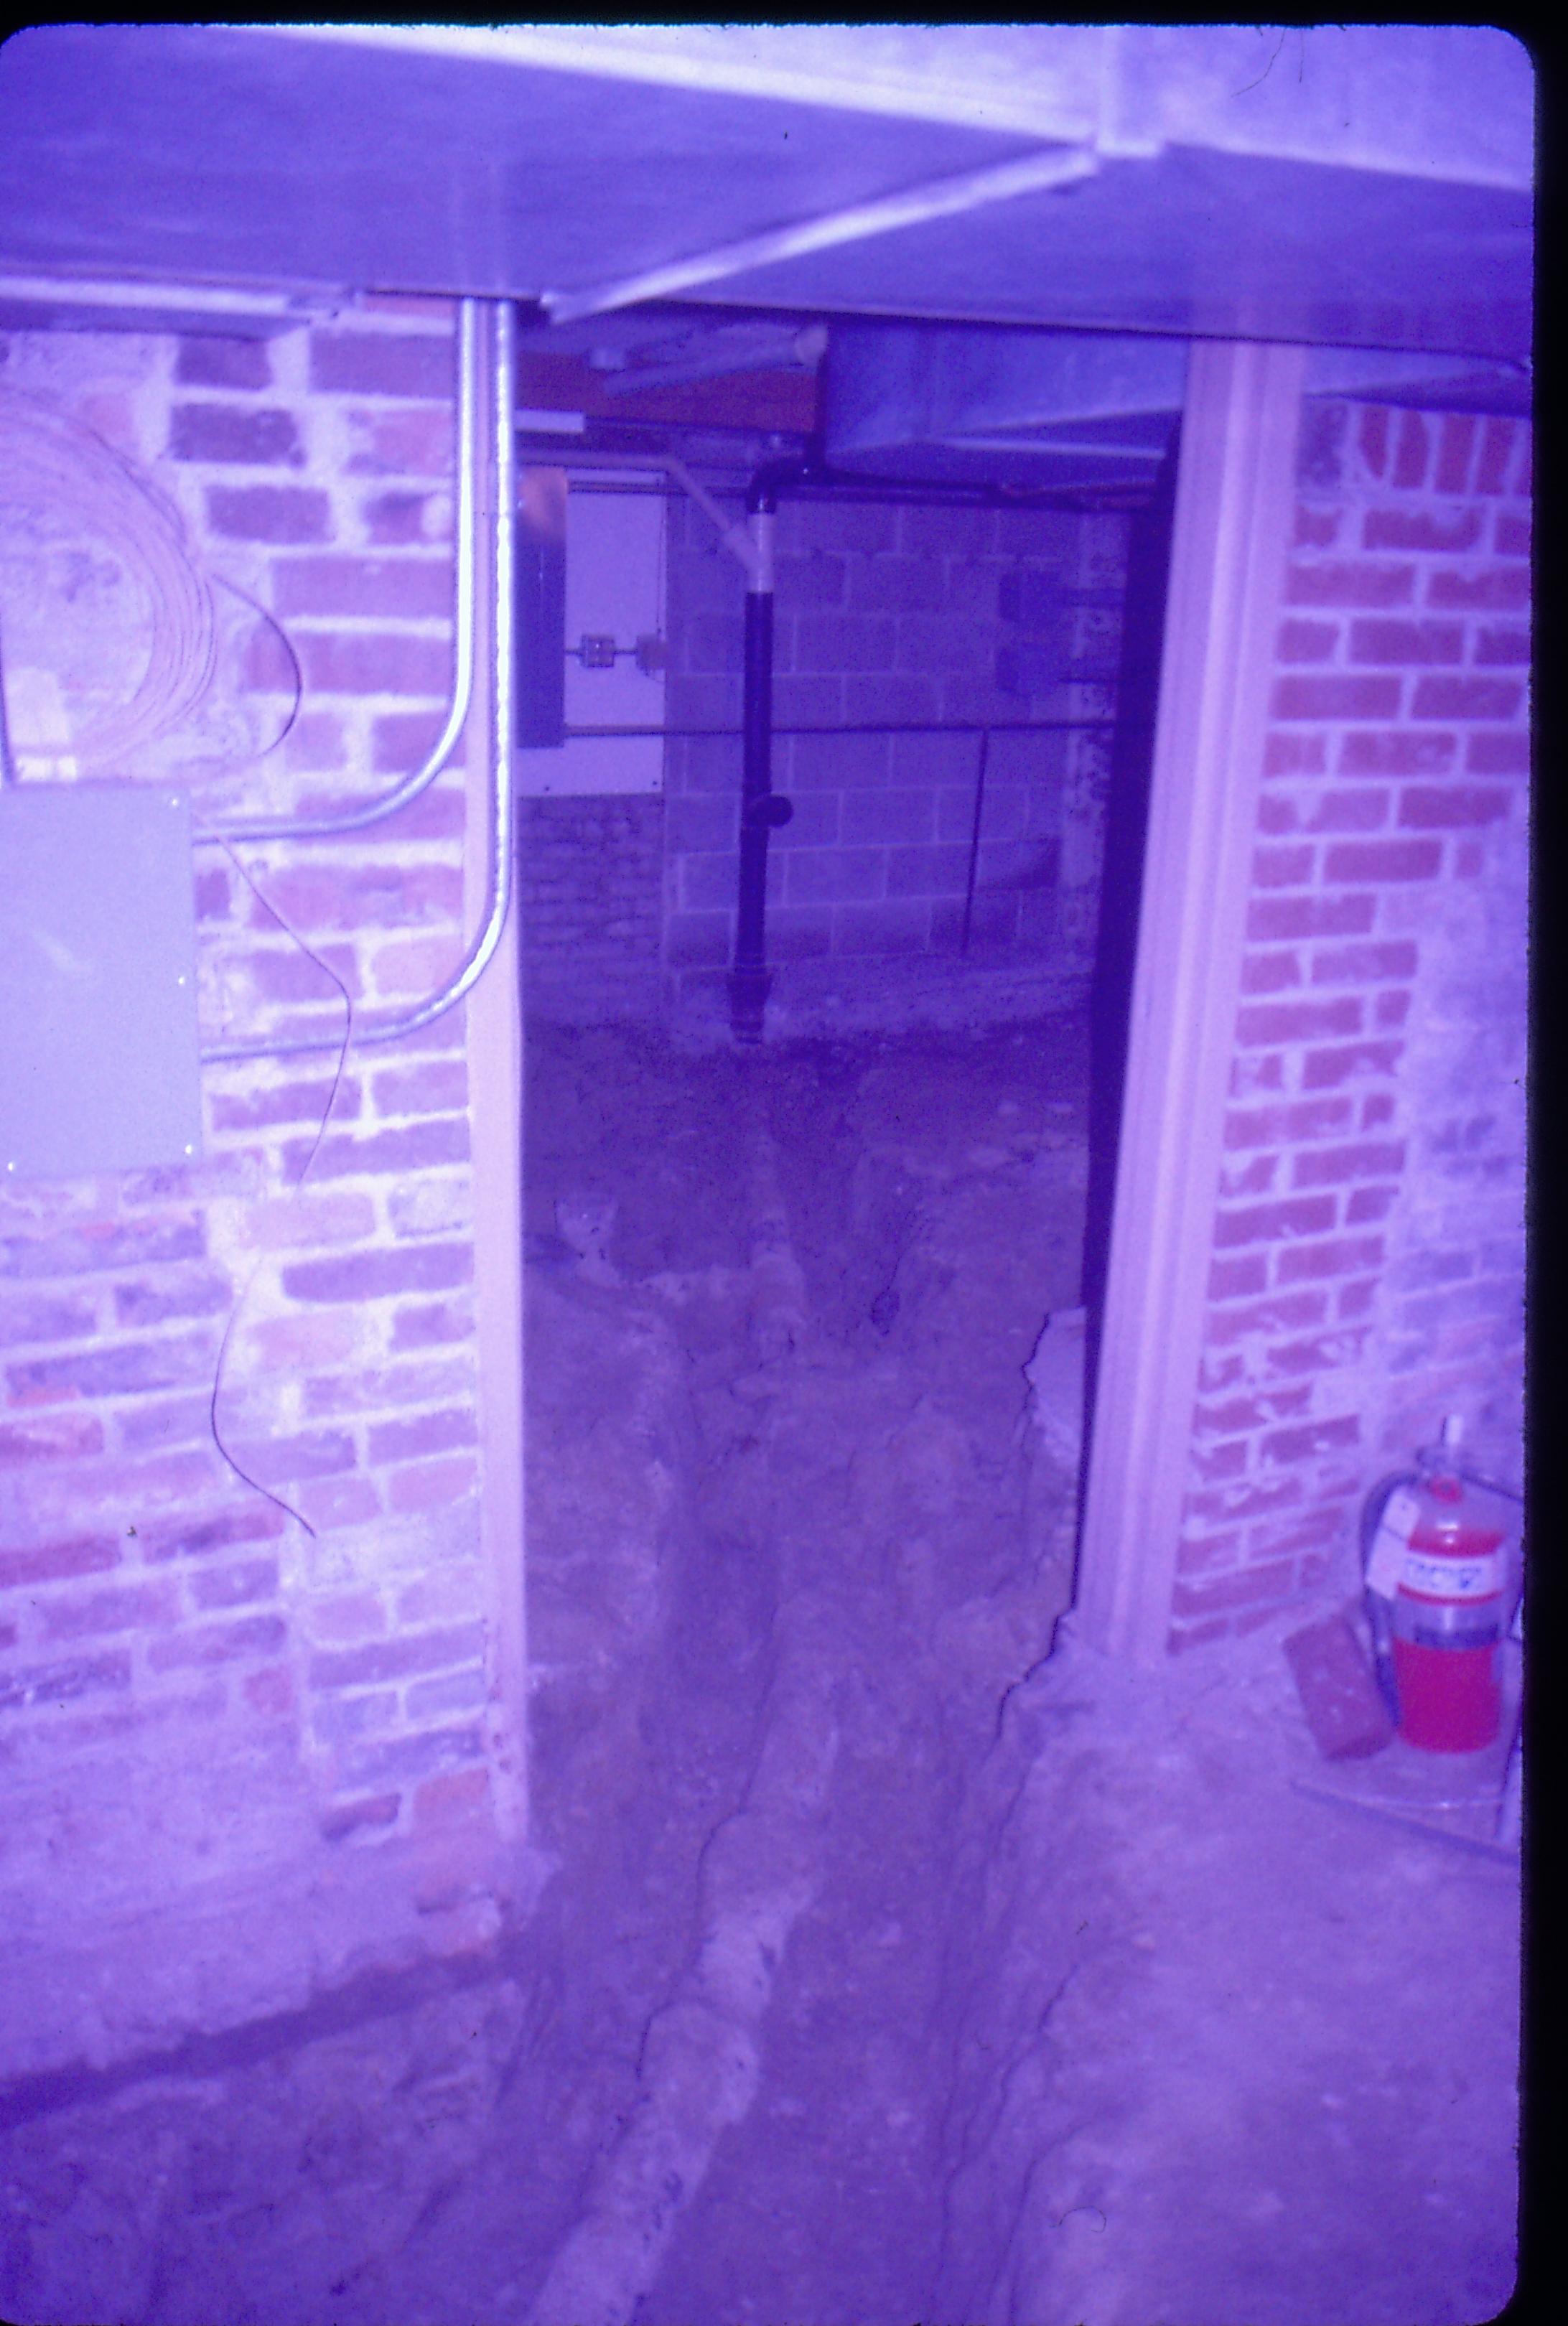 Lyon House - basement, trench dug to reveal old plumbing running under dirt floor in basement. Duct work on ceiling, conduit and pipes seen against walls in main area and furnace room. Fire extinguisher on far right. Looking Northwest into furnace room in basement Lyon, Basement, utilities, pipes, brick walls, cinder block, plumbing